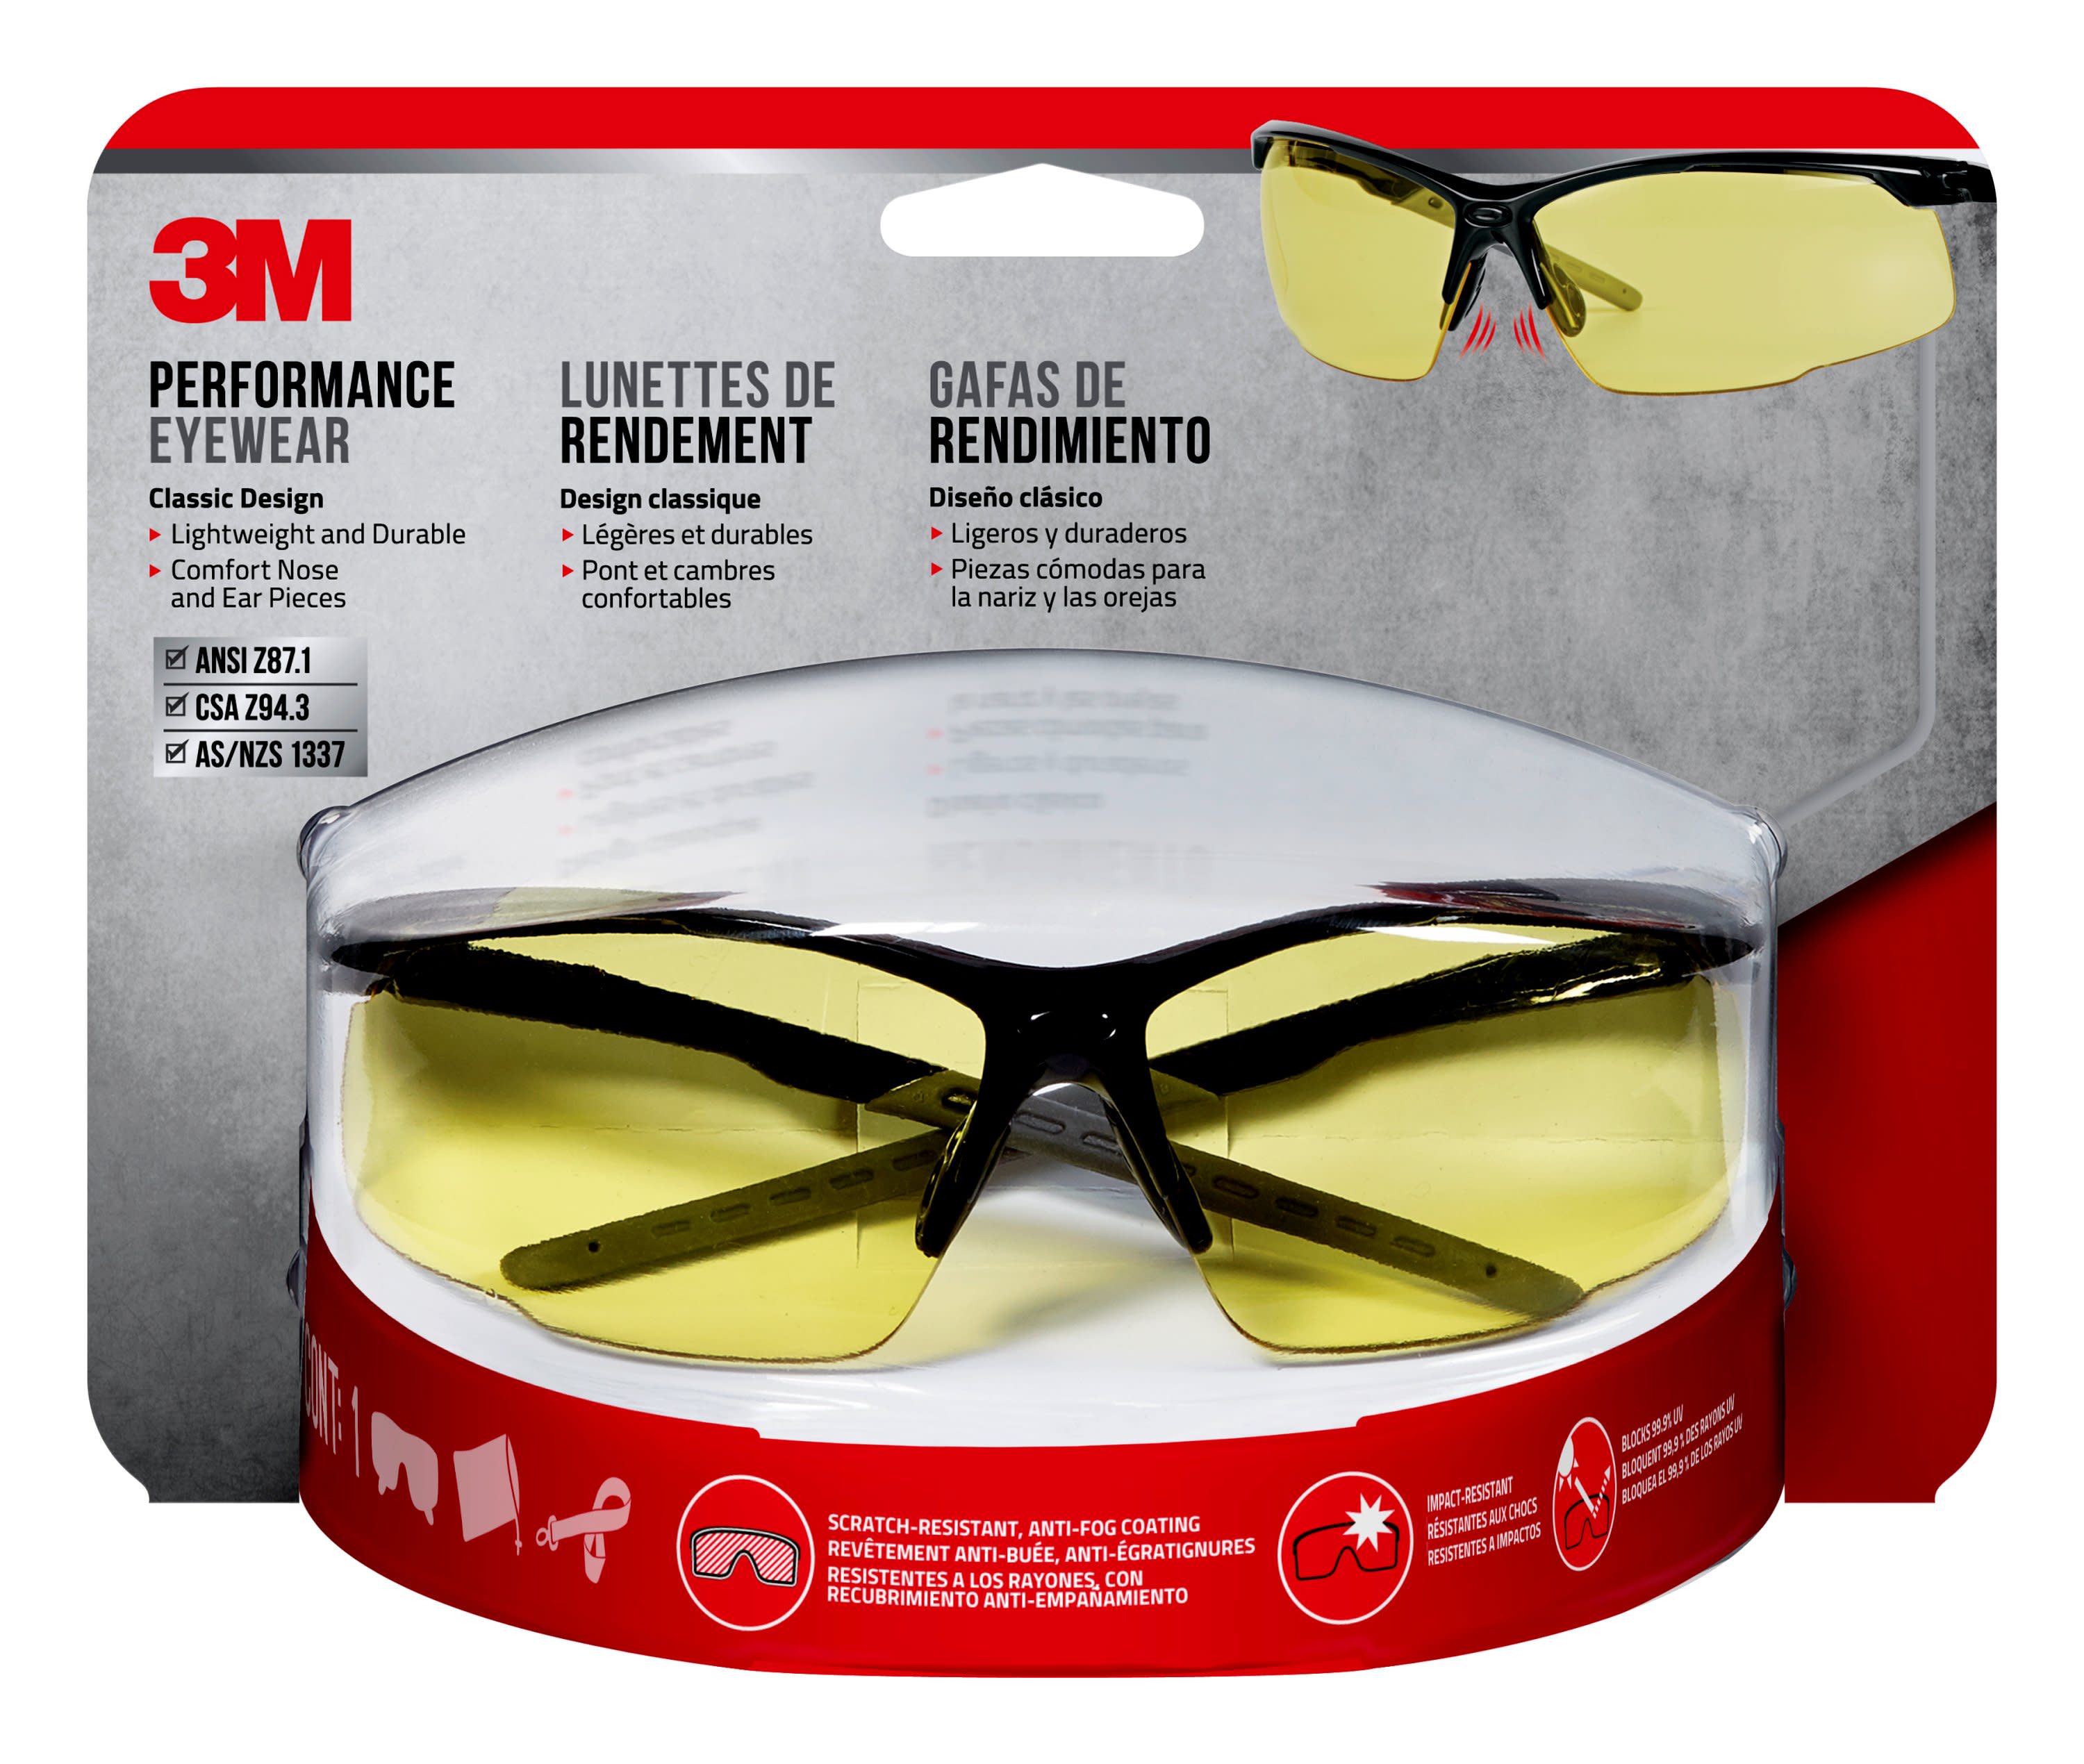 3M Multi-purpose Plastic Anti-fog Safety Glasses in the Eye Protection